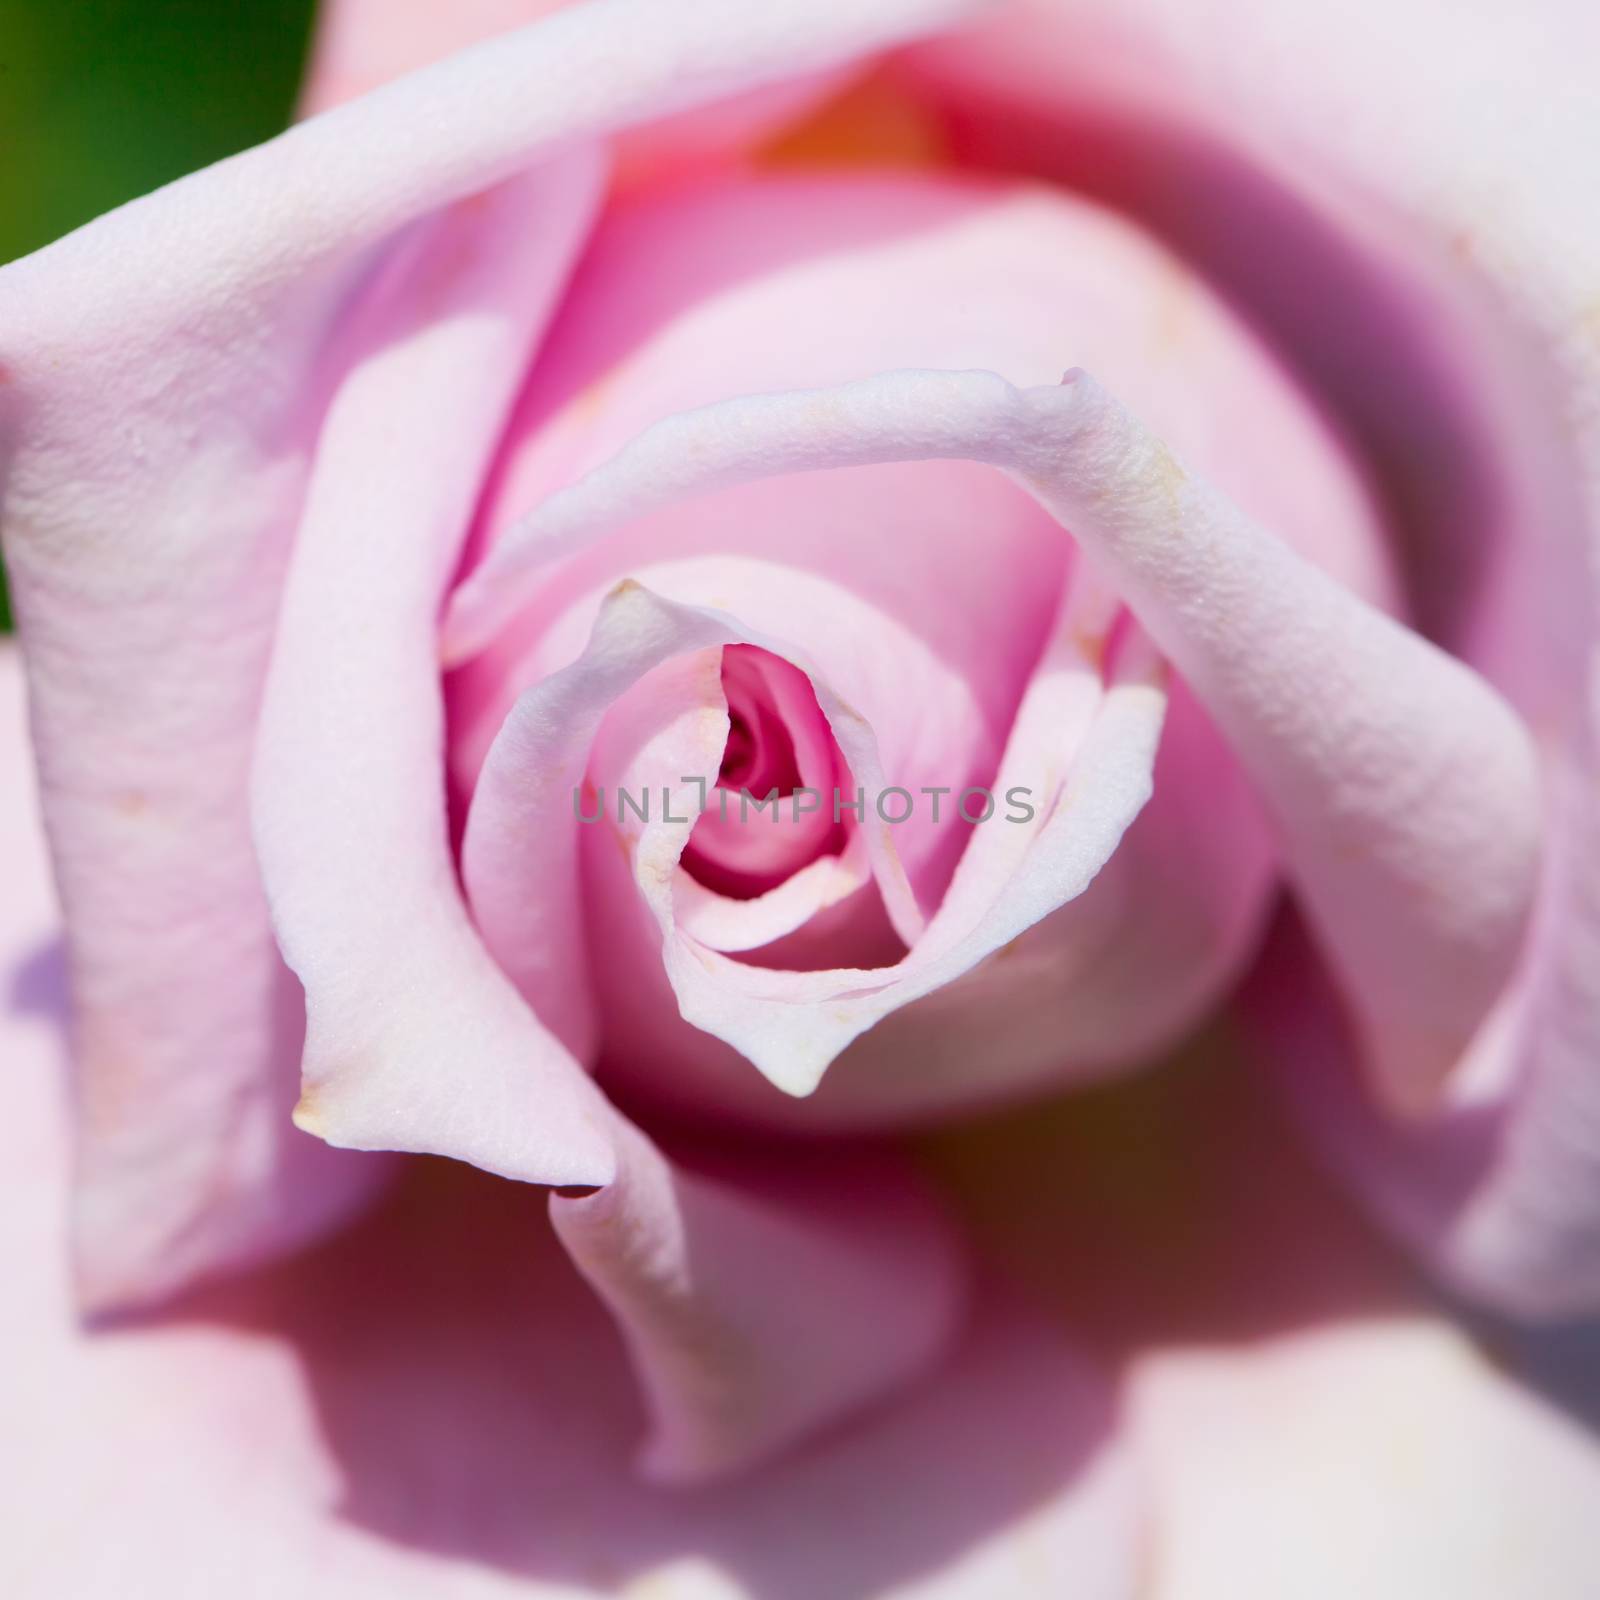 Pink rose in strict close up, square image